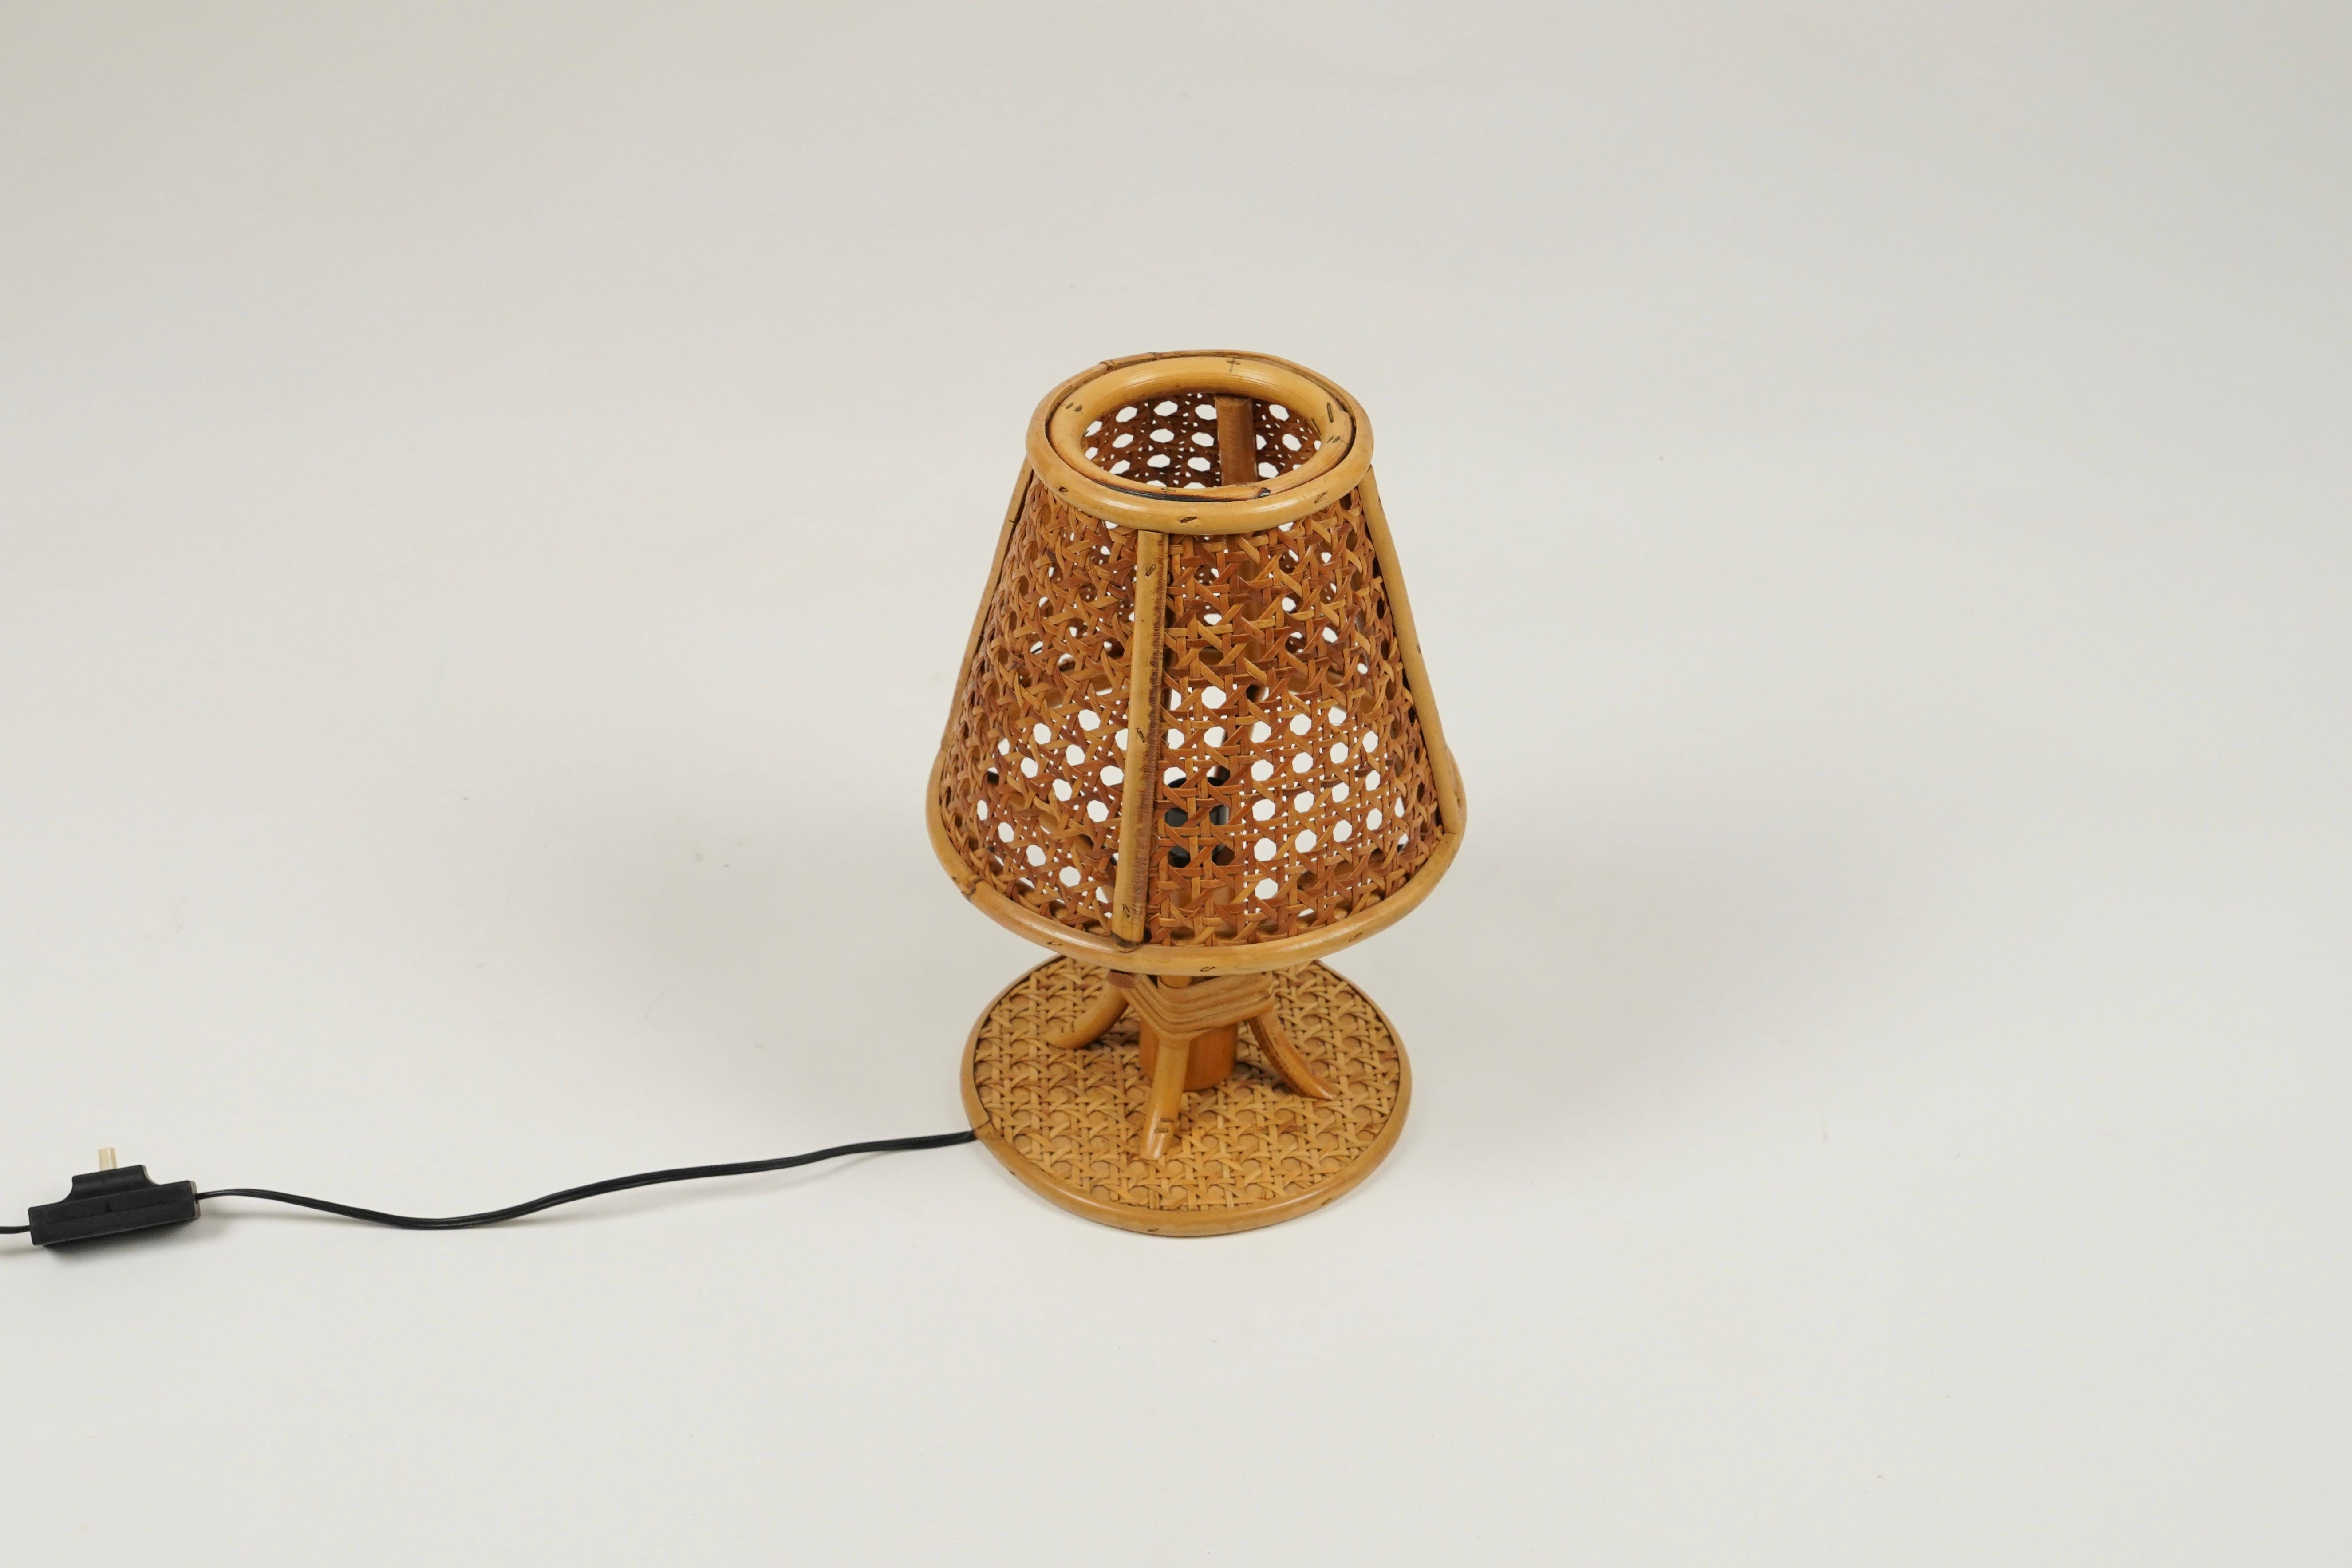 Midcentury Rattan and Wicker Table Lamp Louis Sognot Style, Italy, circa 1970s For Sale 3